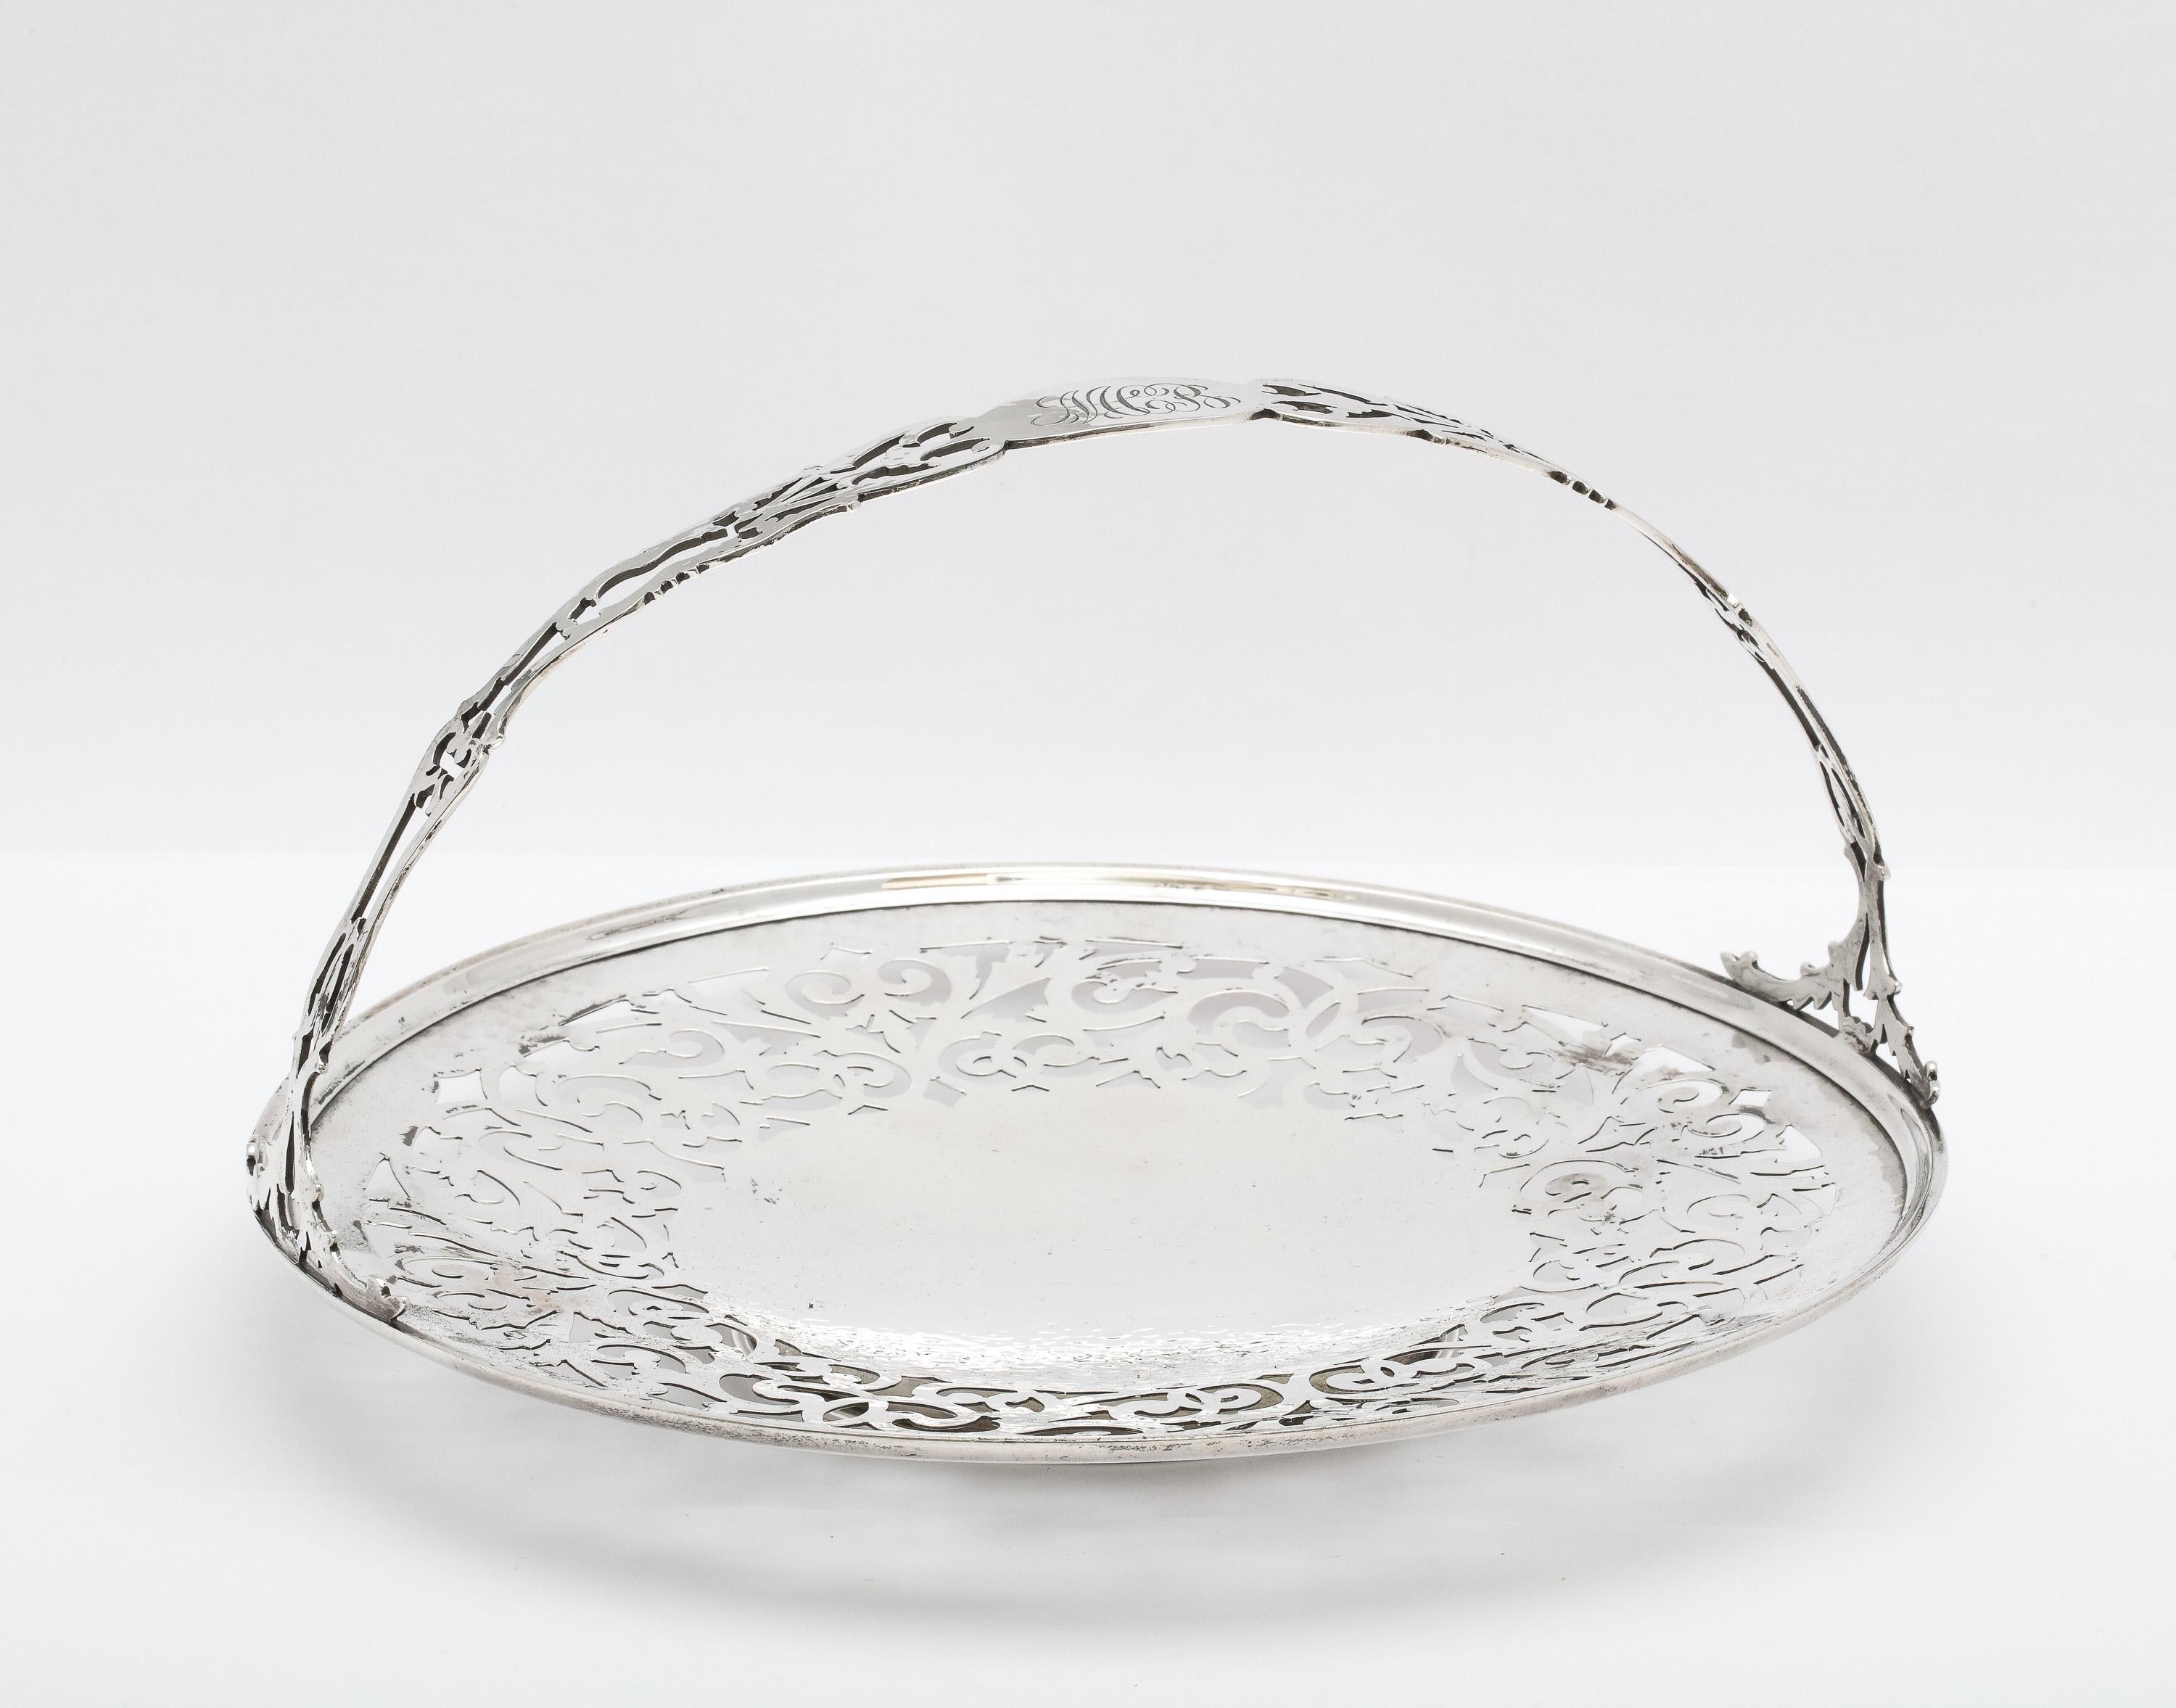 Art Nouveau, sterling silver, pedestal based, cake/cookie platter/basket,  Gorham Manufacturing Company, Providence, Rhode Island, year-hallmarked for 1918. Lightly hammered in design and having a lovely, pierced design that is continued on the